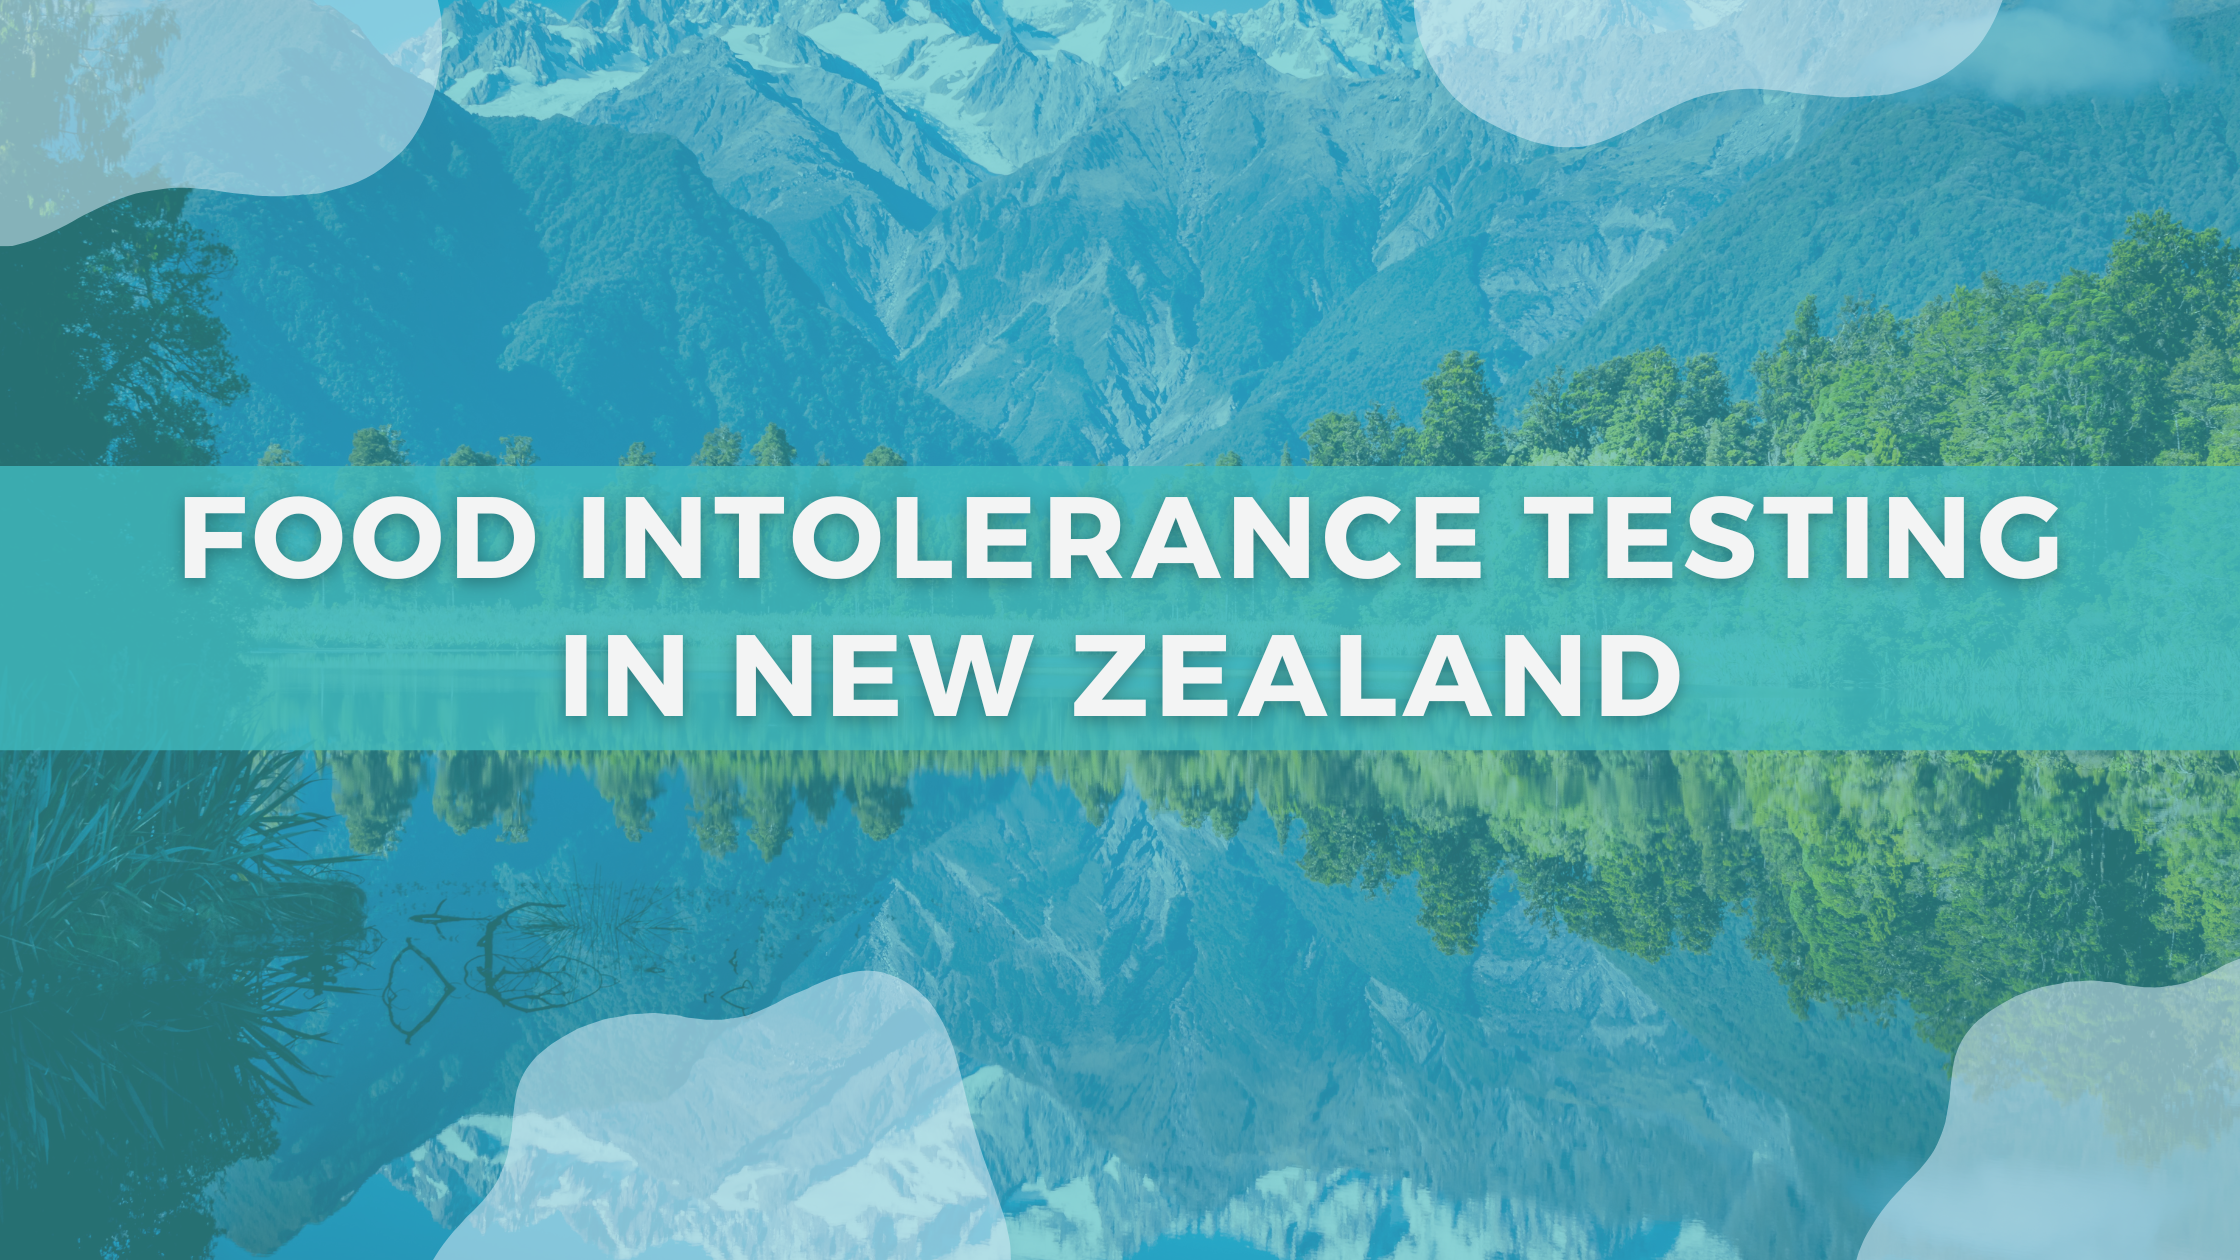 Food Intolerance Testing in New Zealand